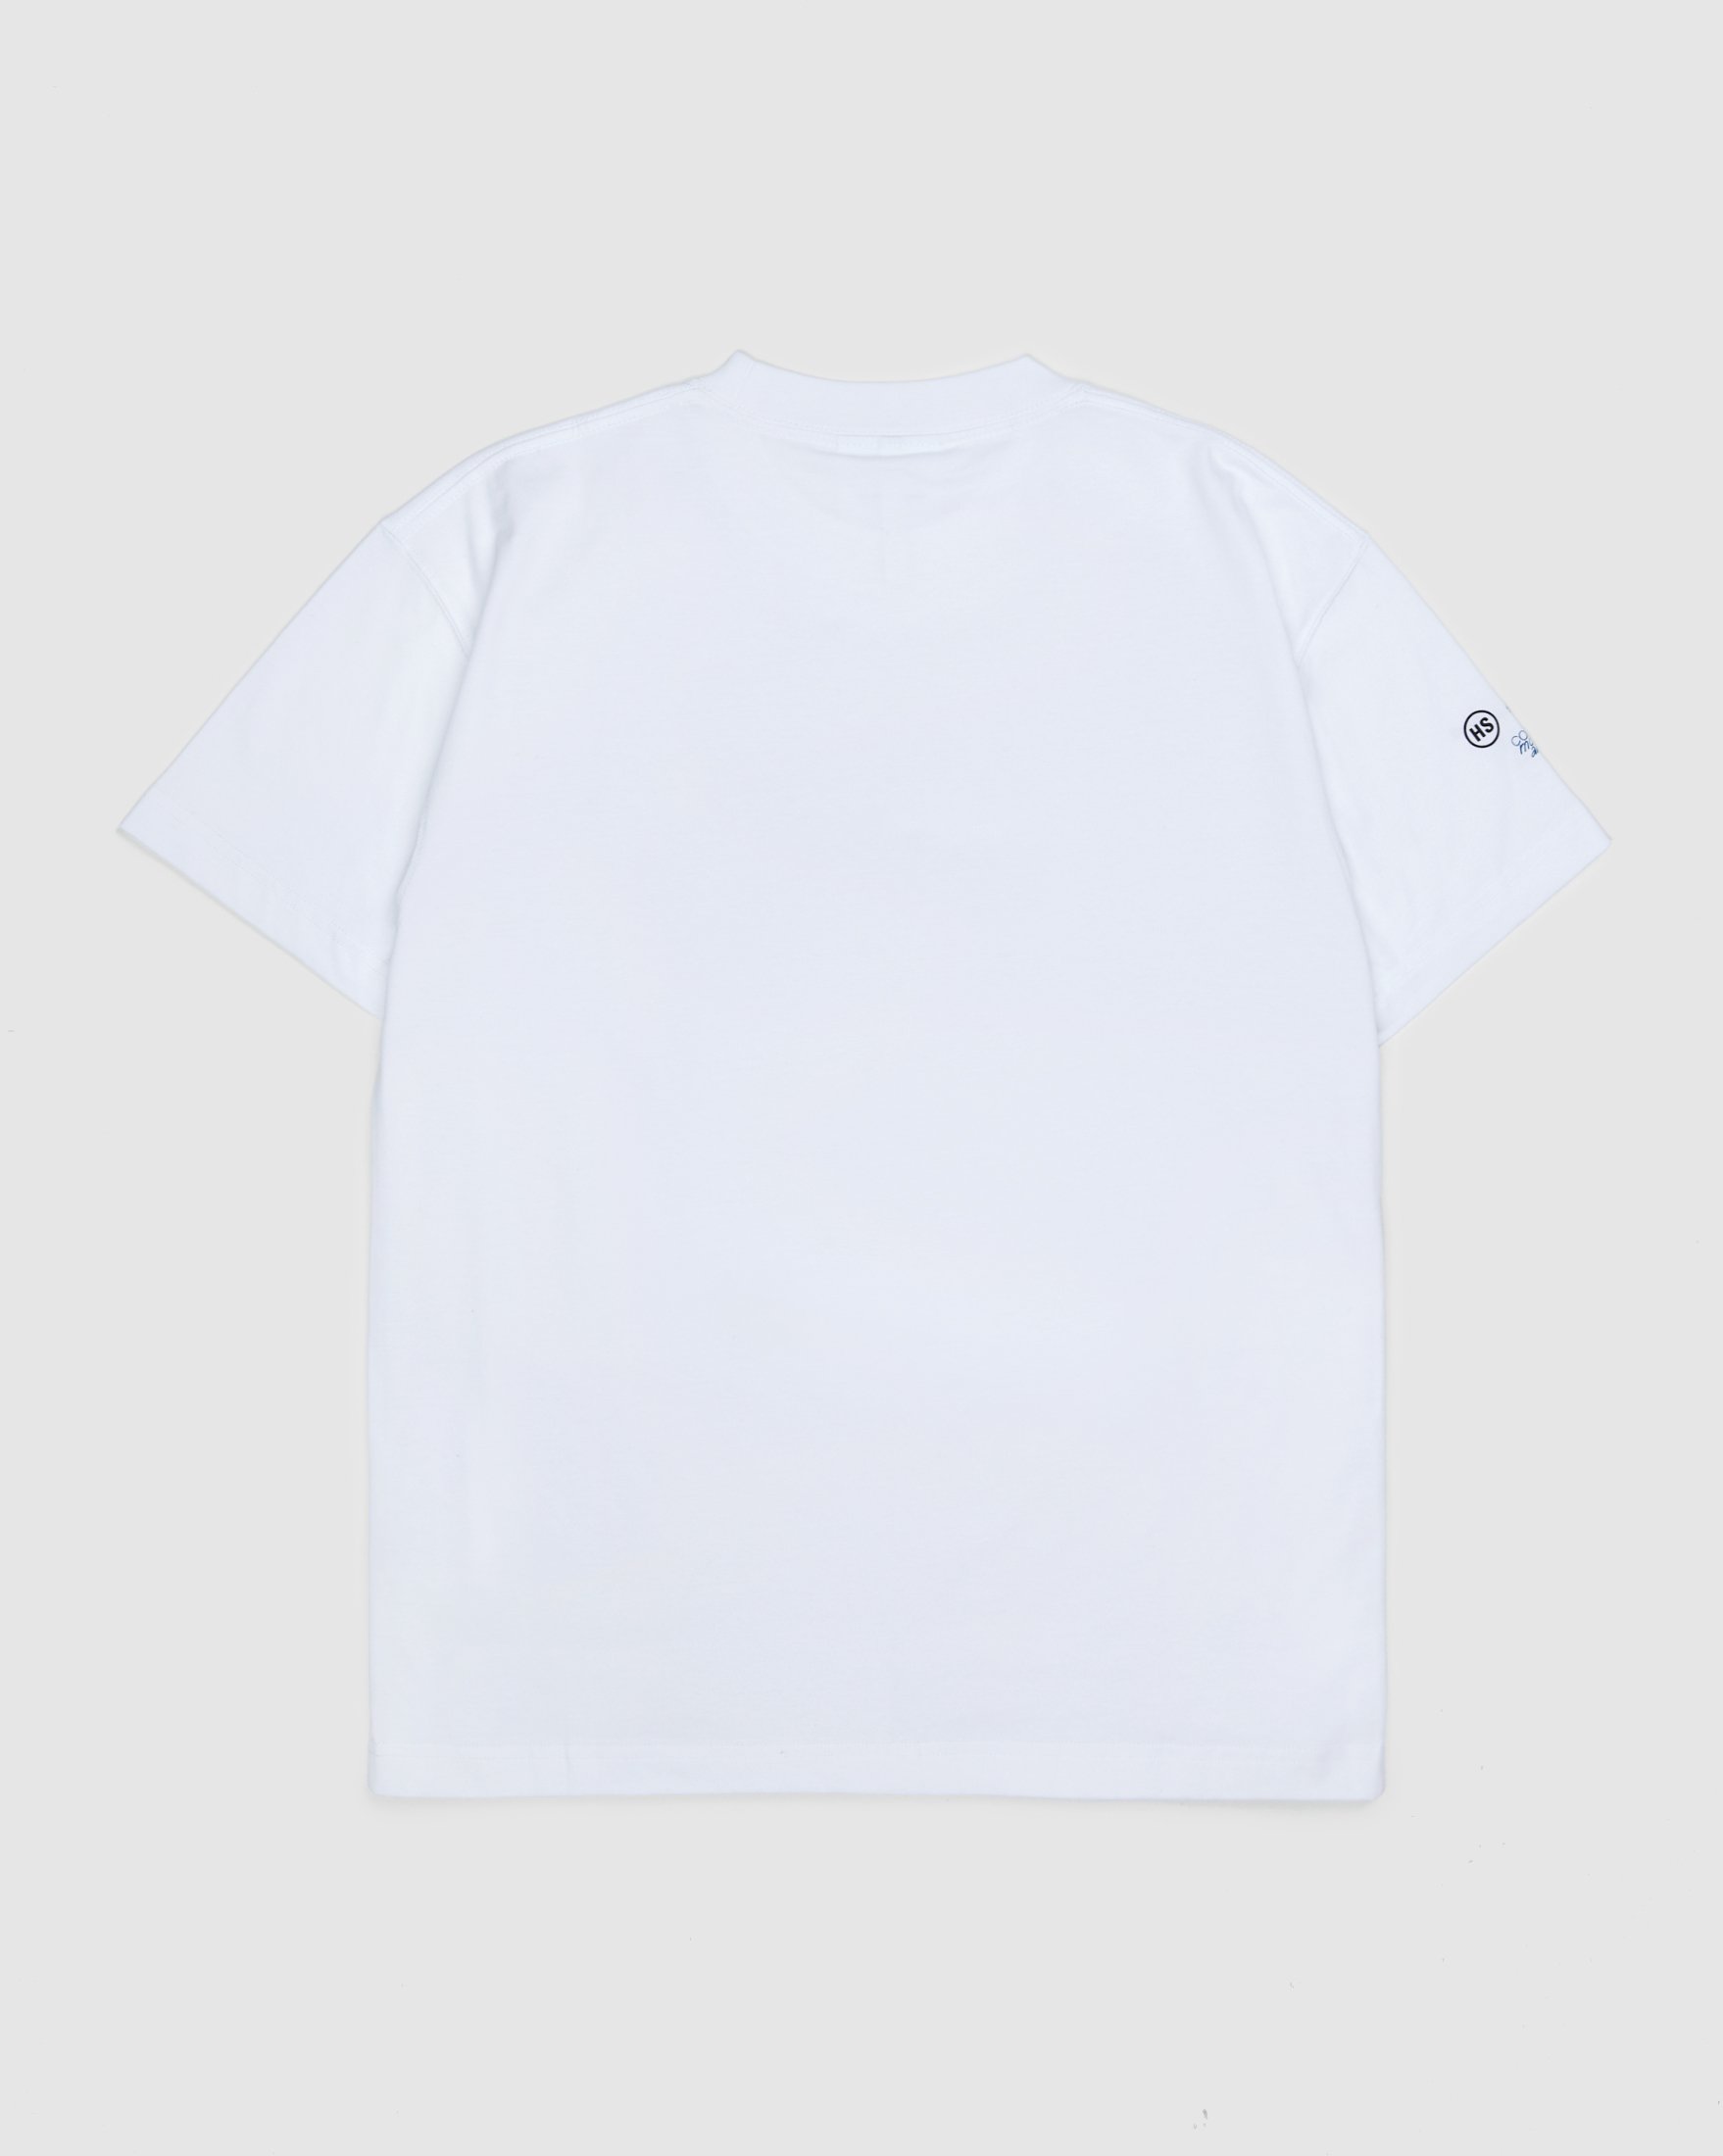 Colette Mon Amour x Soulland - Snoopy Bed White T-Shirt - Clothing - White - Image 2